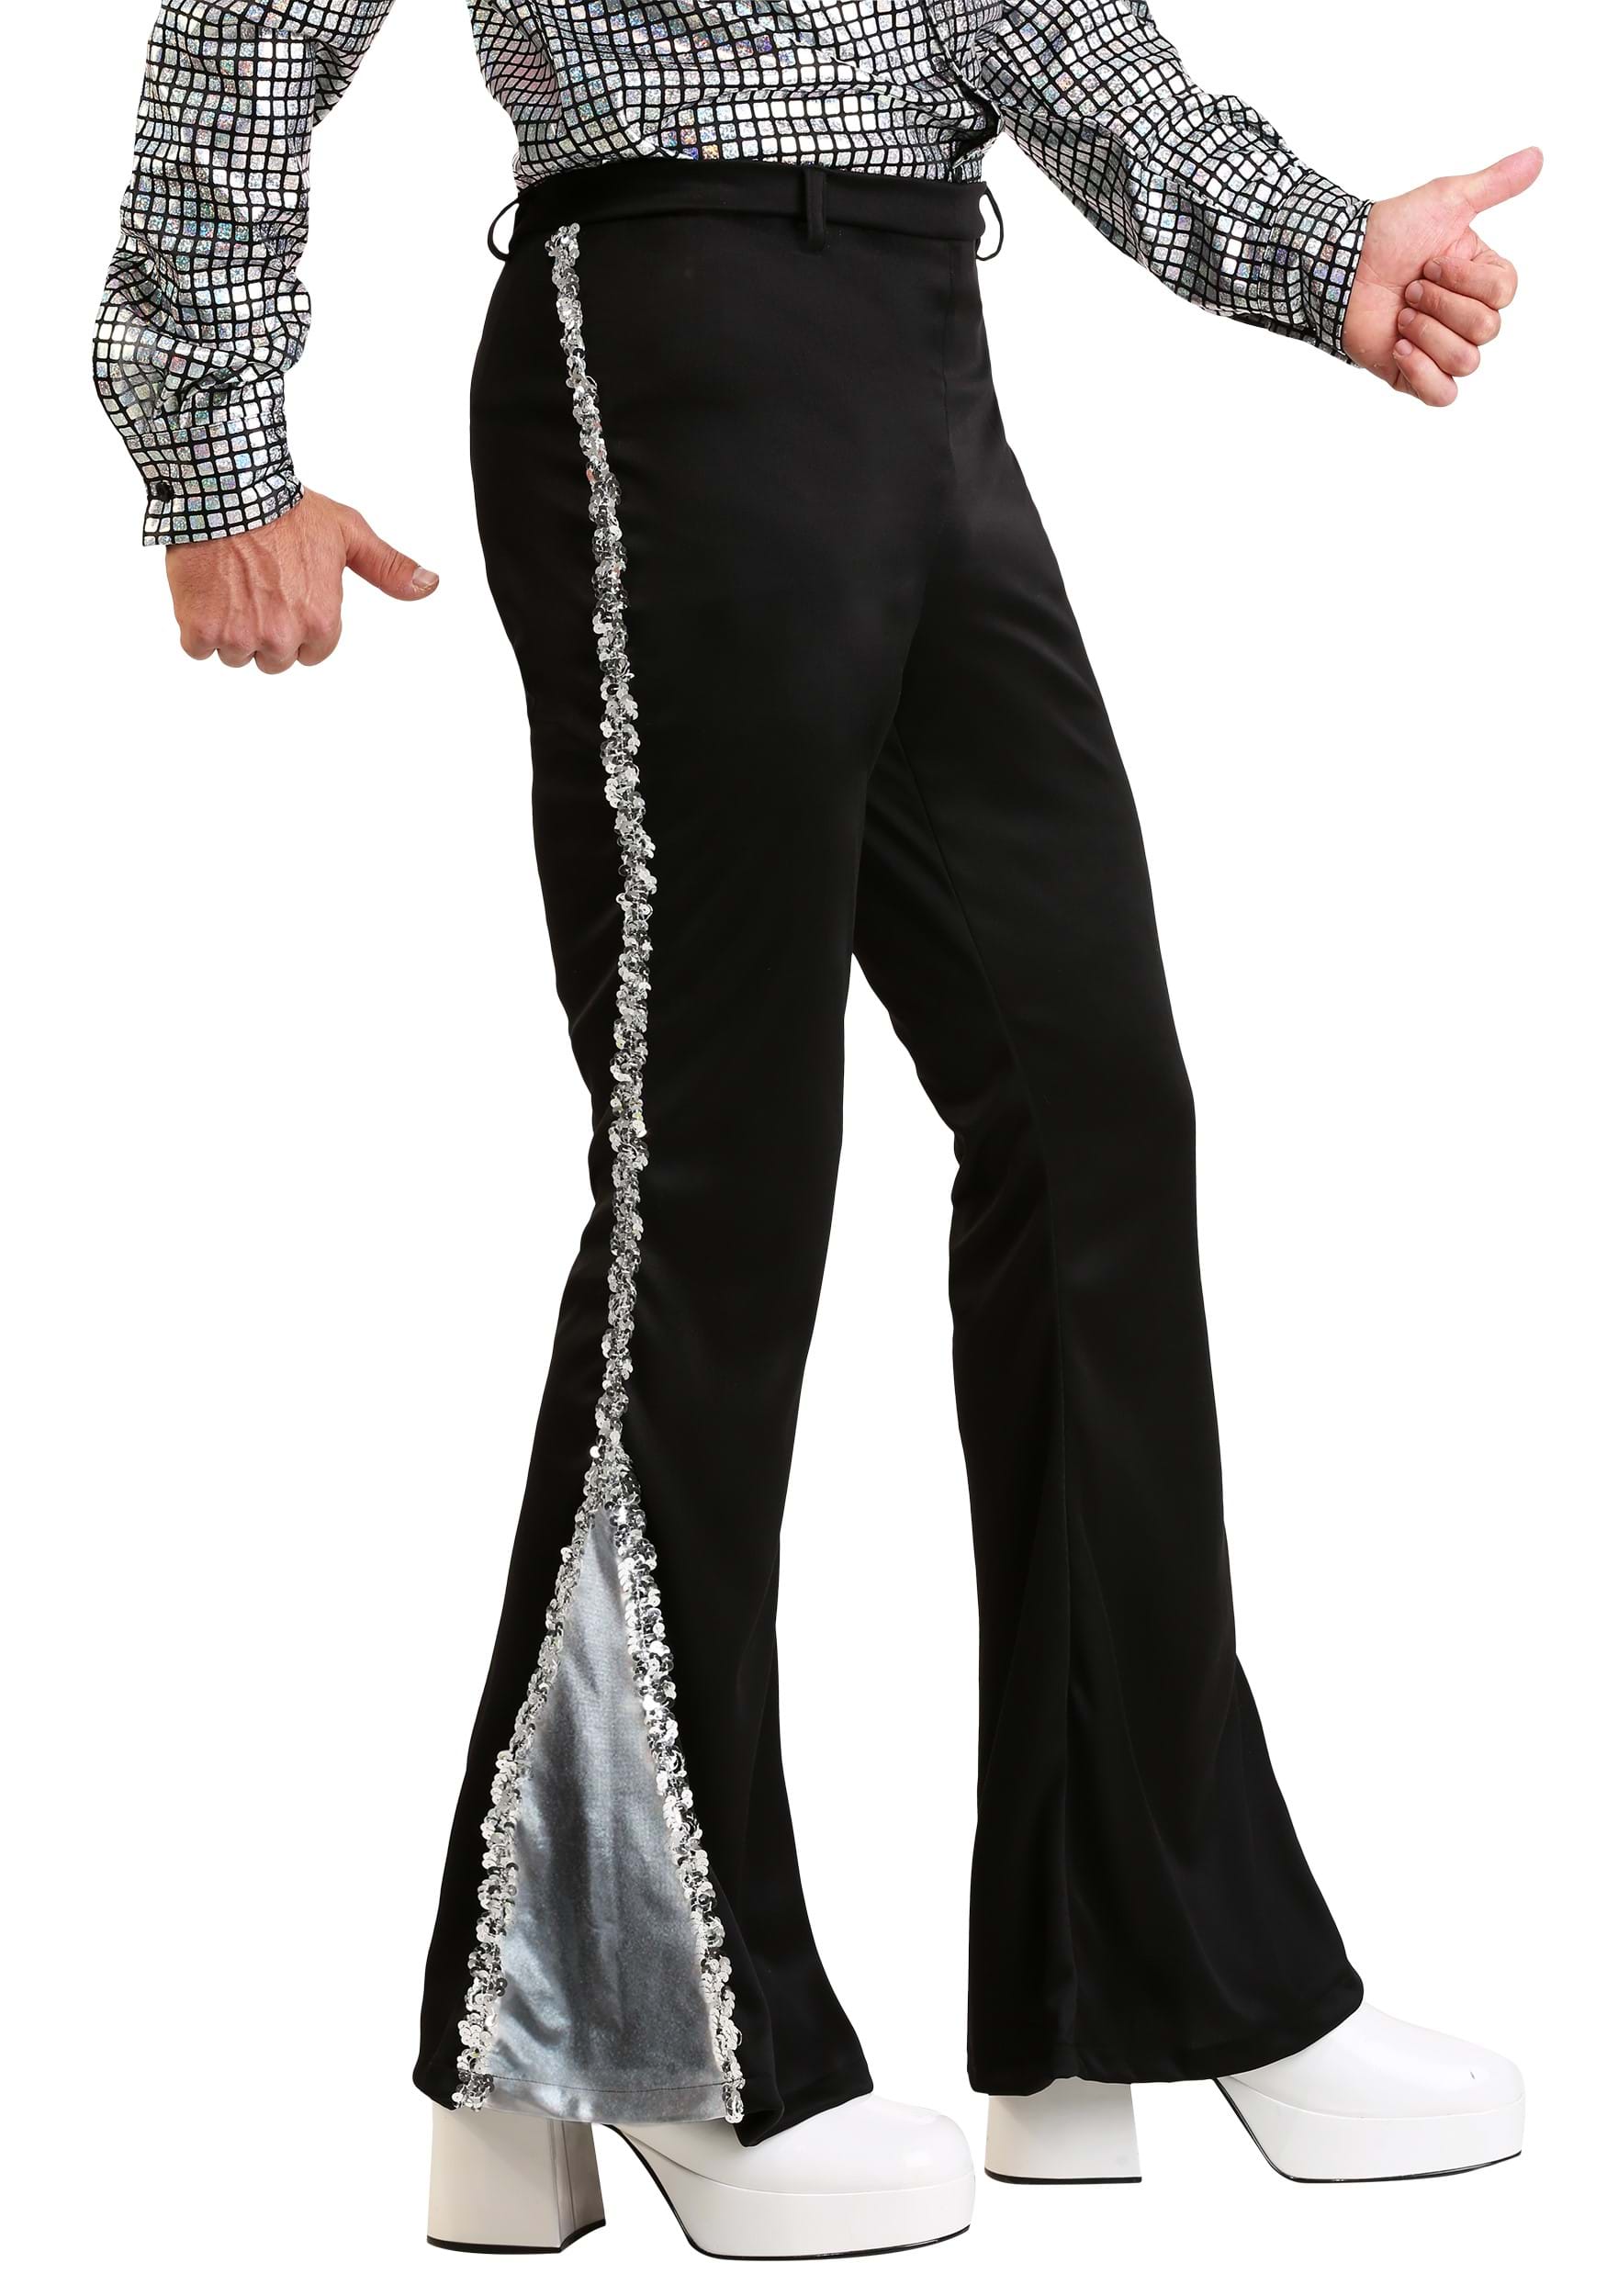 https://images.halloweencostumes.ca/products/68397/1-1/mens-plus-size-silver-sequin-disco-pants.jpg